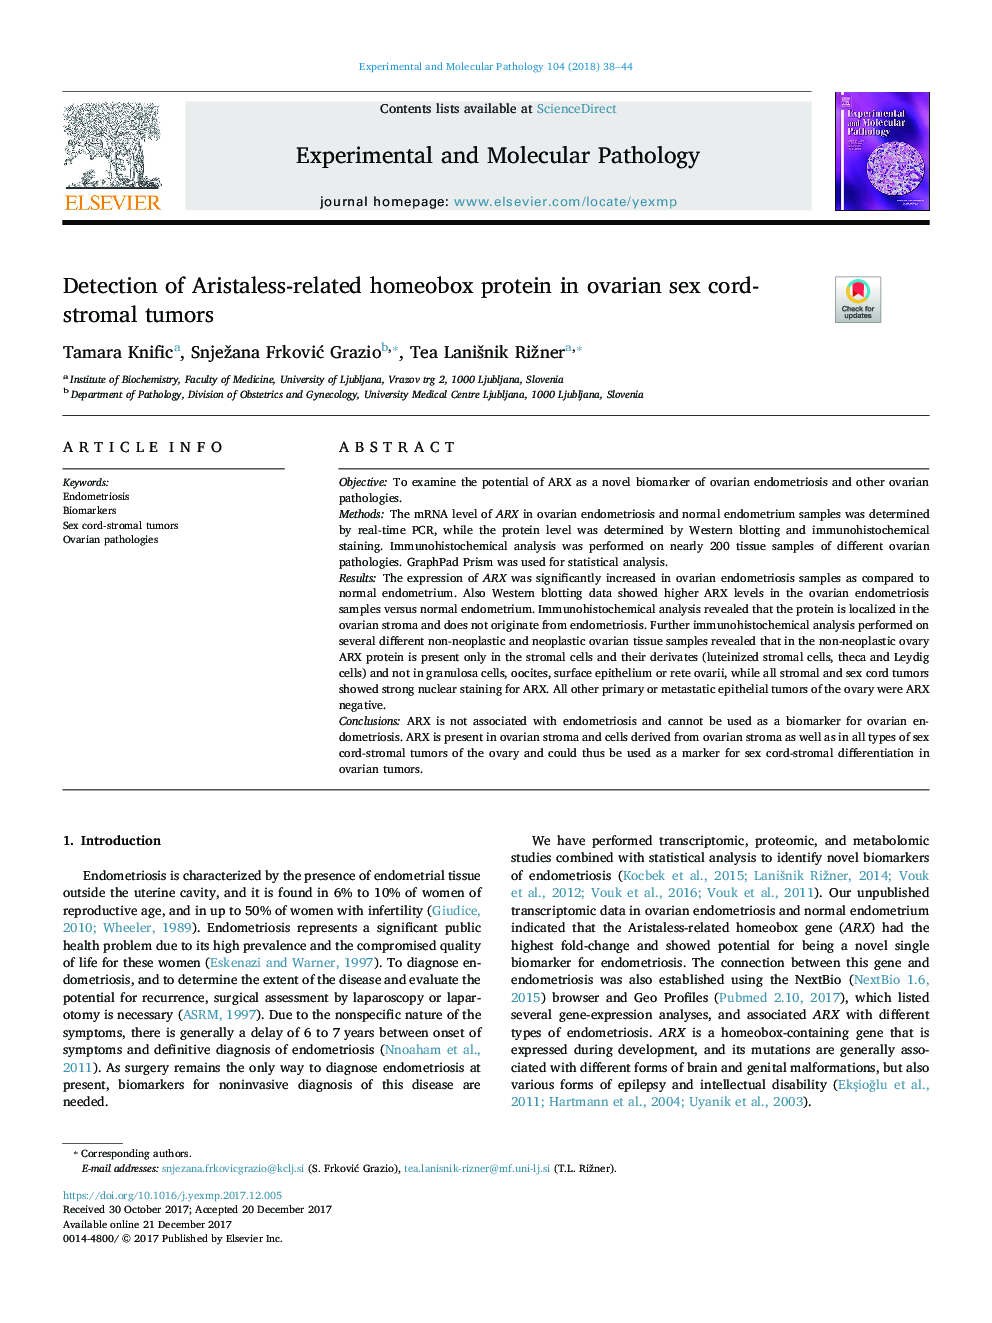 Detection of Aristaless-related homeobox protein in ovarian sex cord-stromal tumors